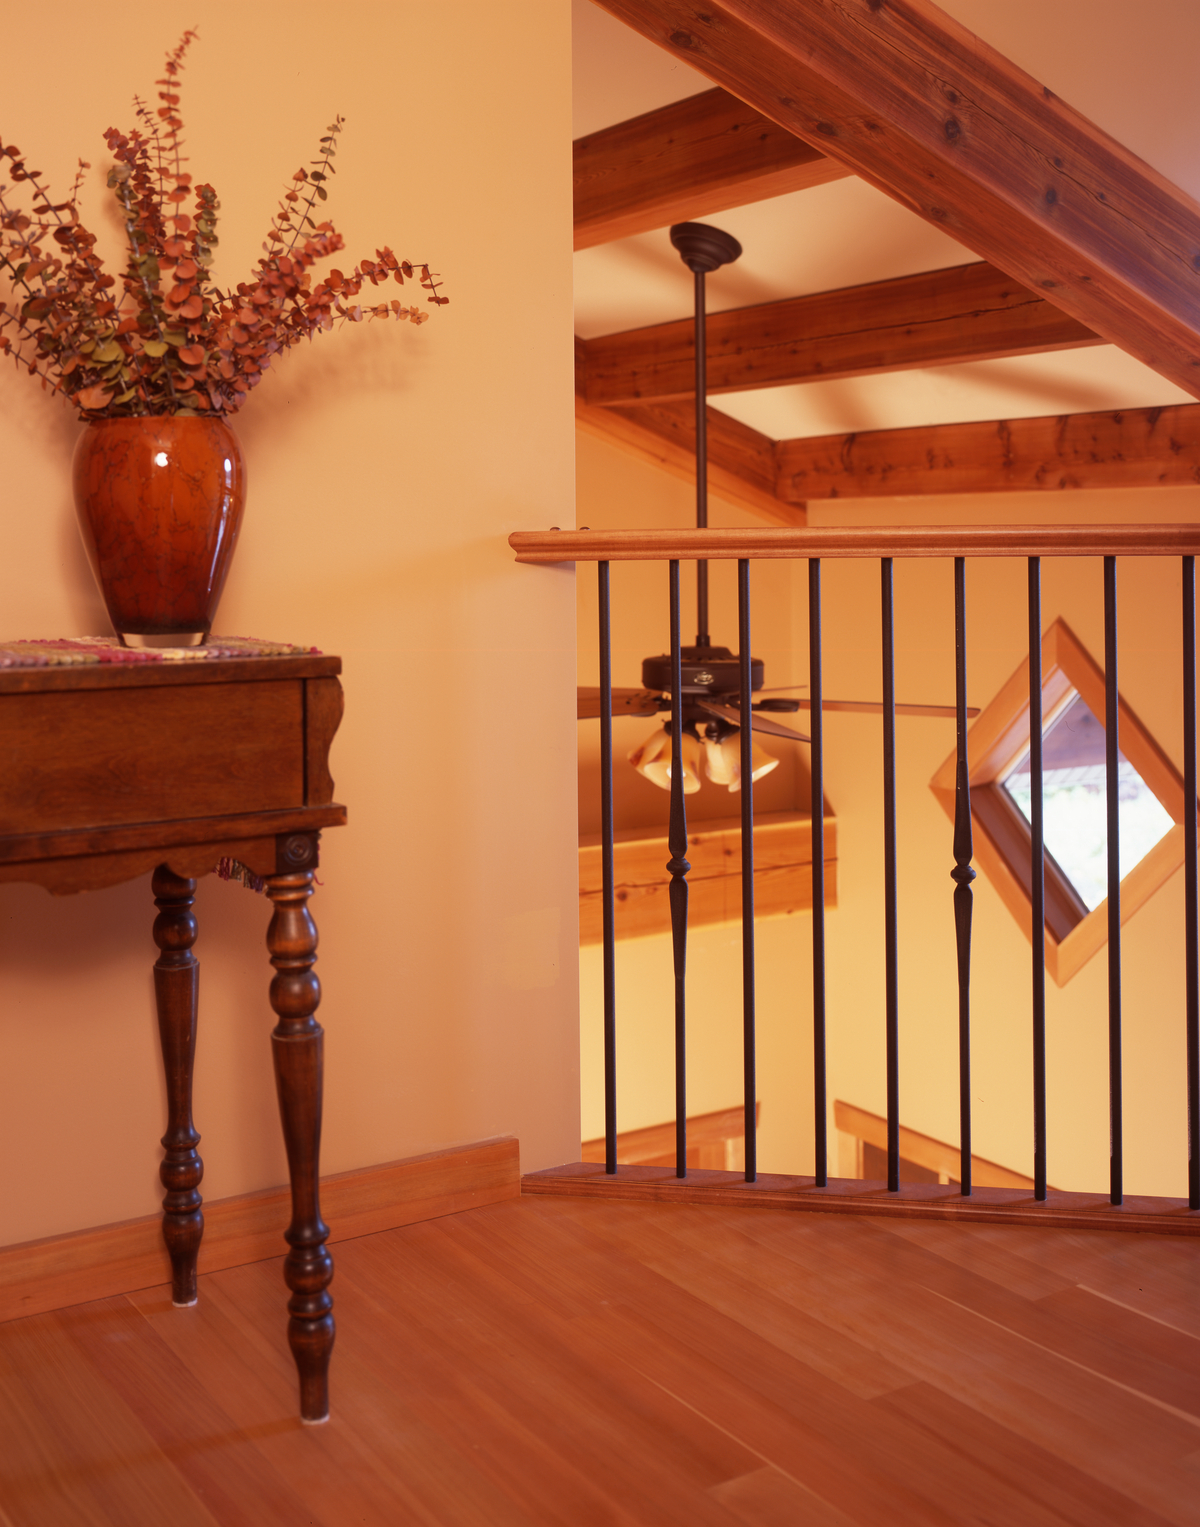 Daytime interior image of upper floor landing and railing with extensive use of wood for trim, flooring, and ceiling beams - used as Western Larch (Larix occidentalis) usage examples